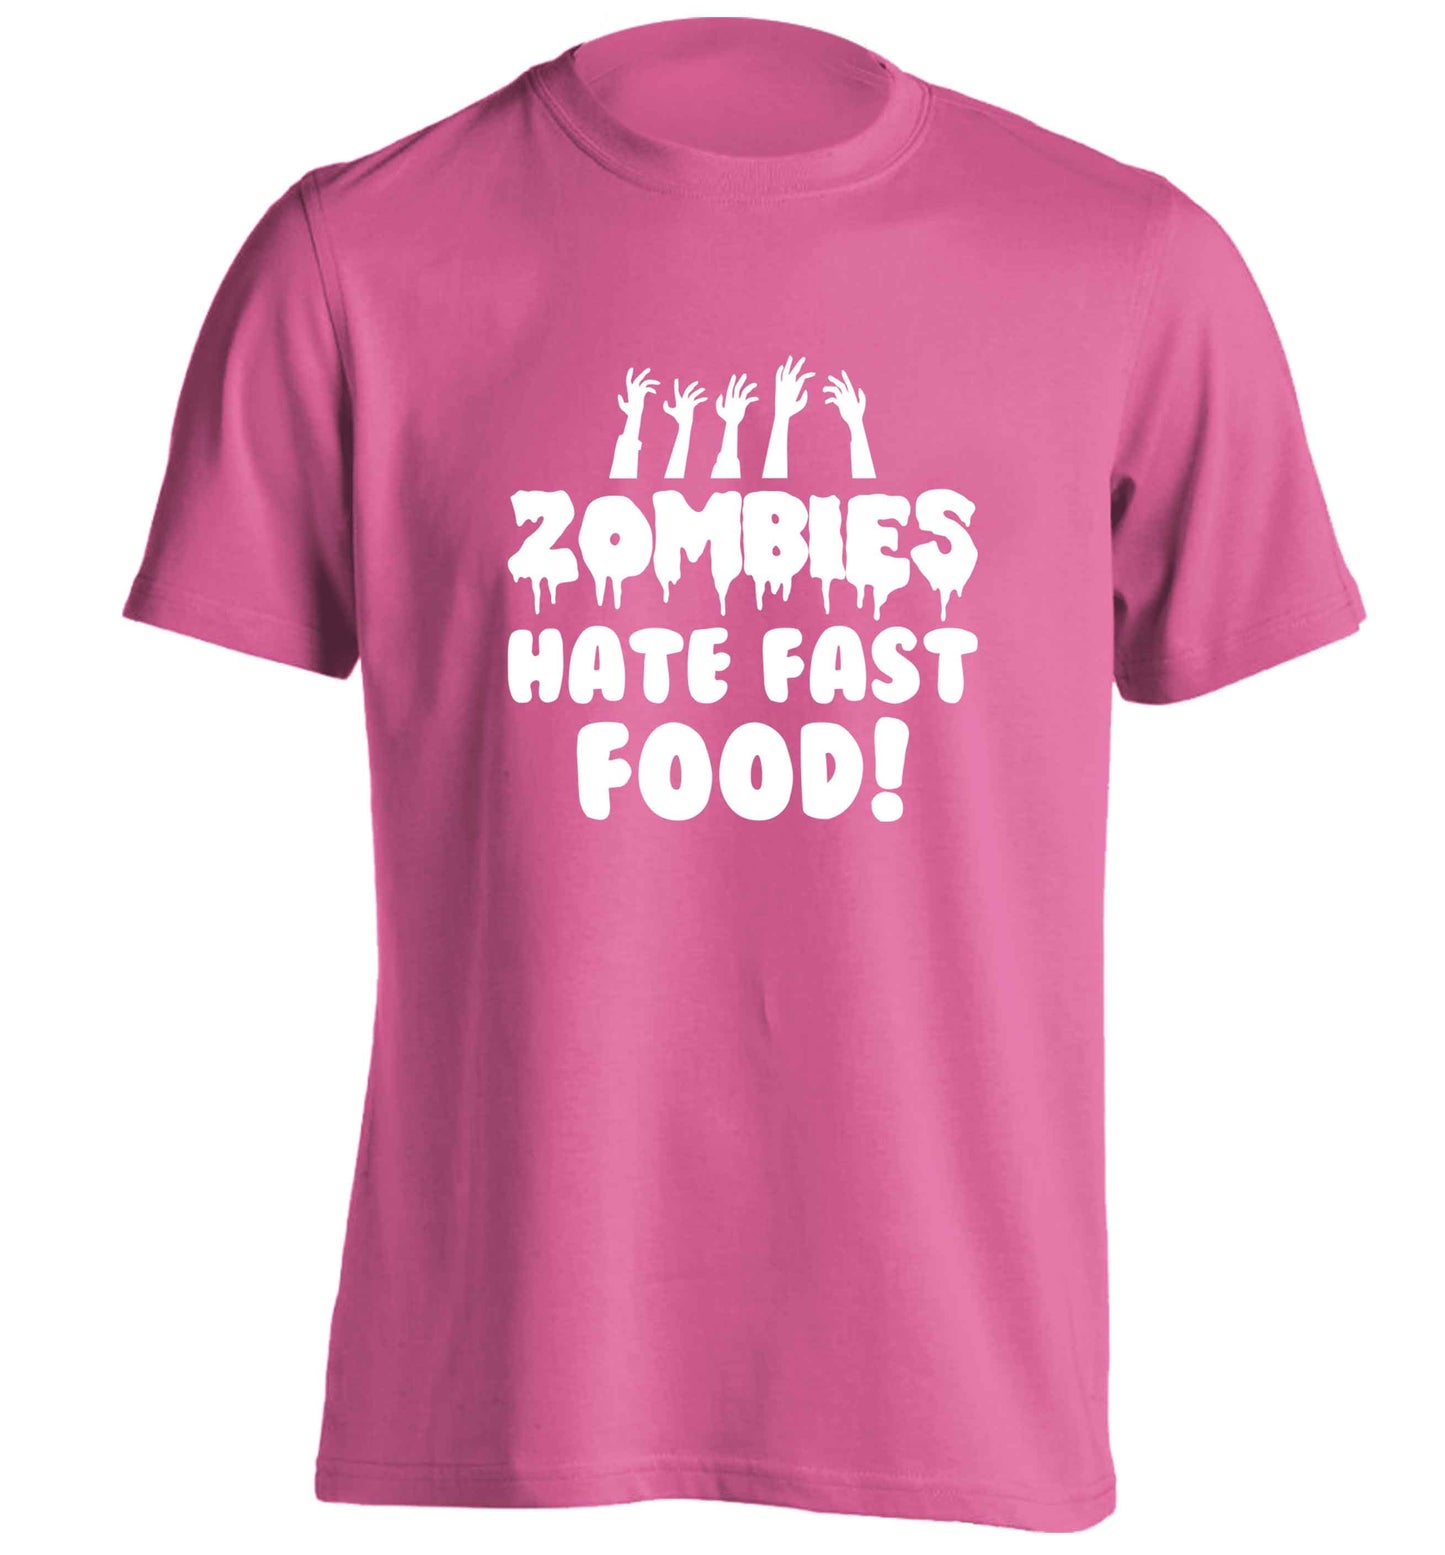 Zombies hate fast food adults unisex pink Tshirt 2XL